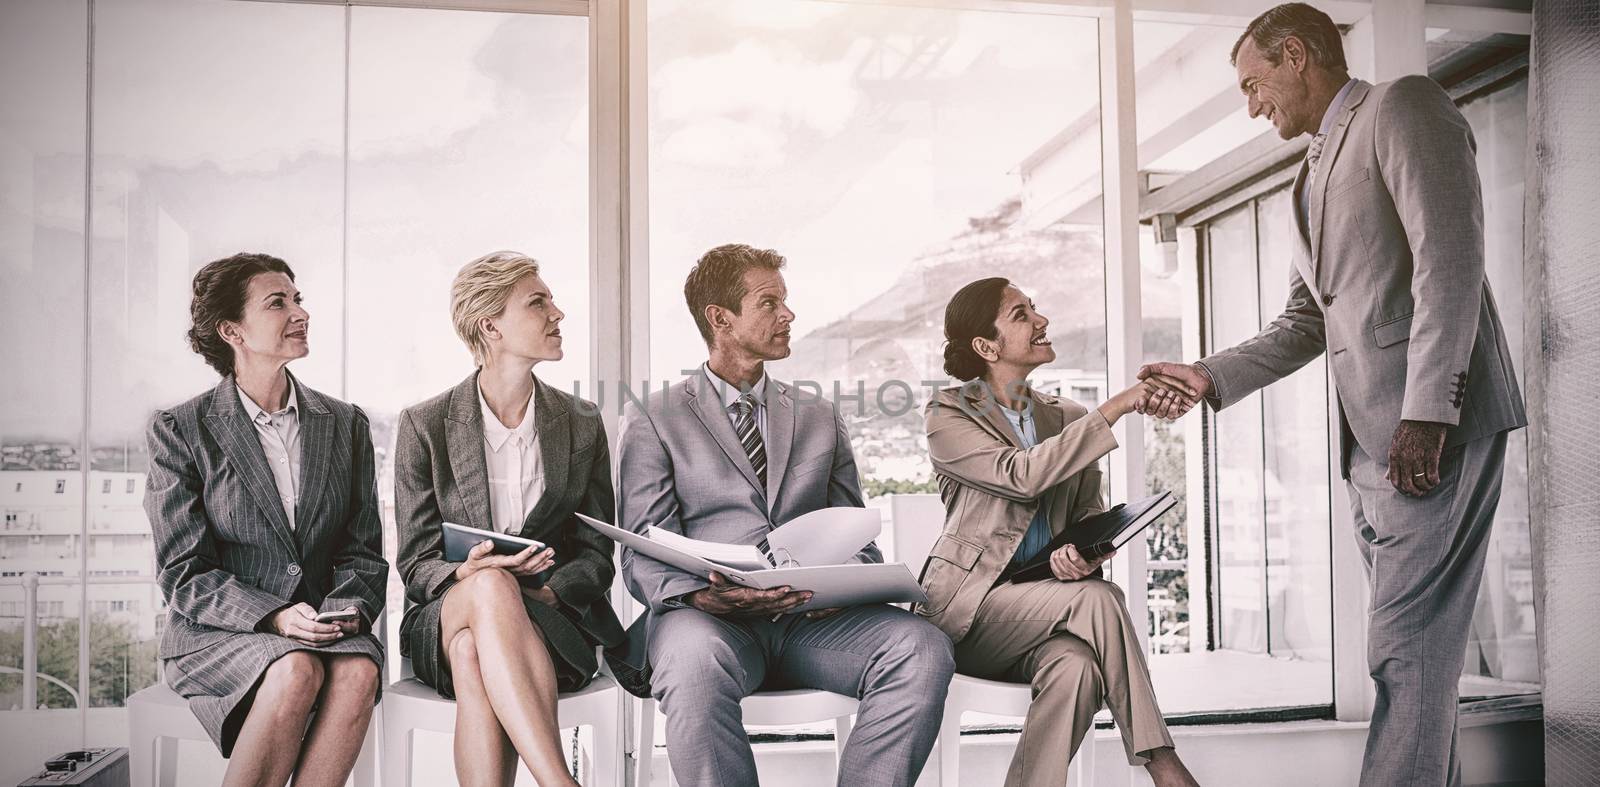 Manager welcoming people waiting for interview  by Wavebreakmedia